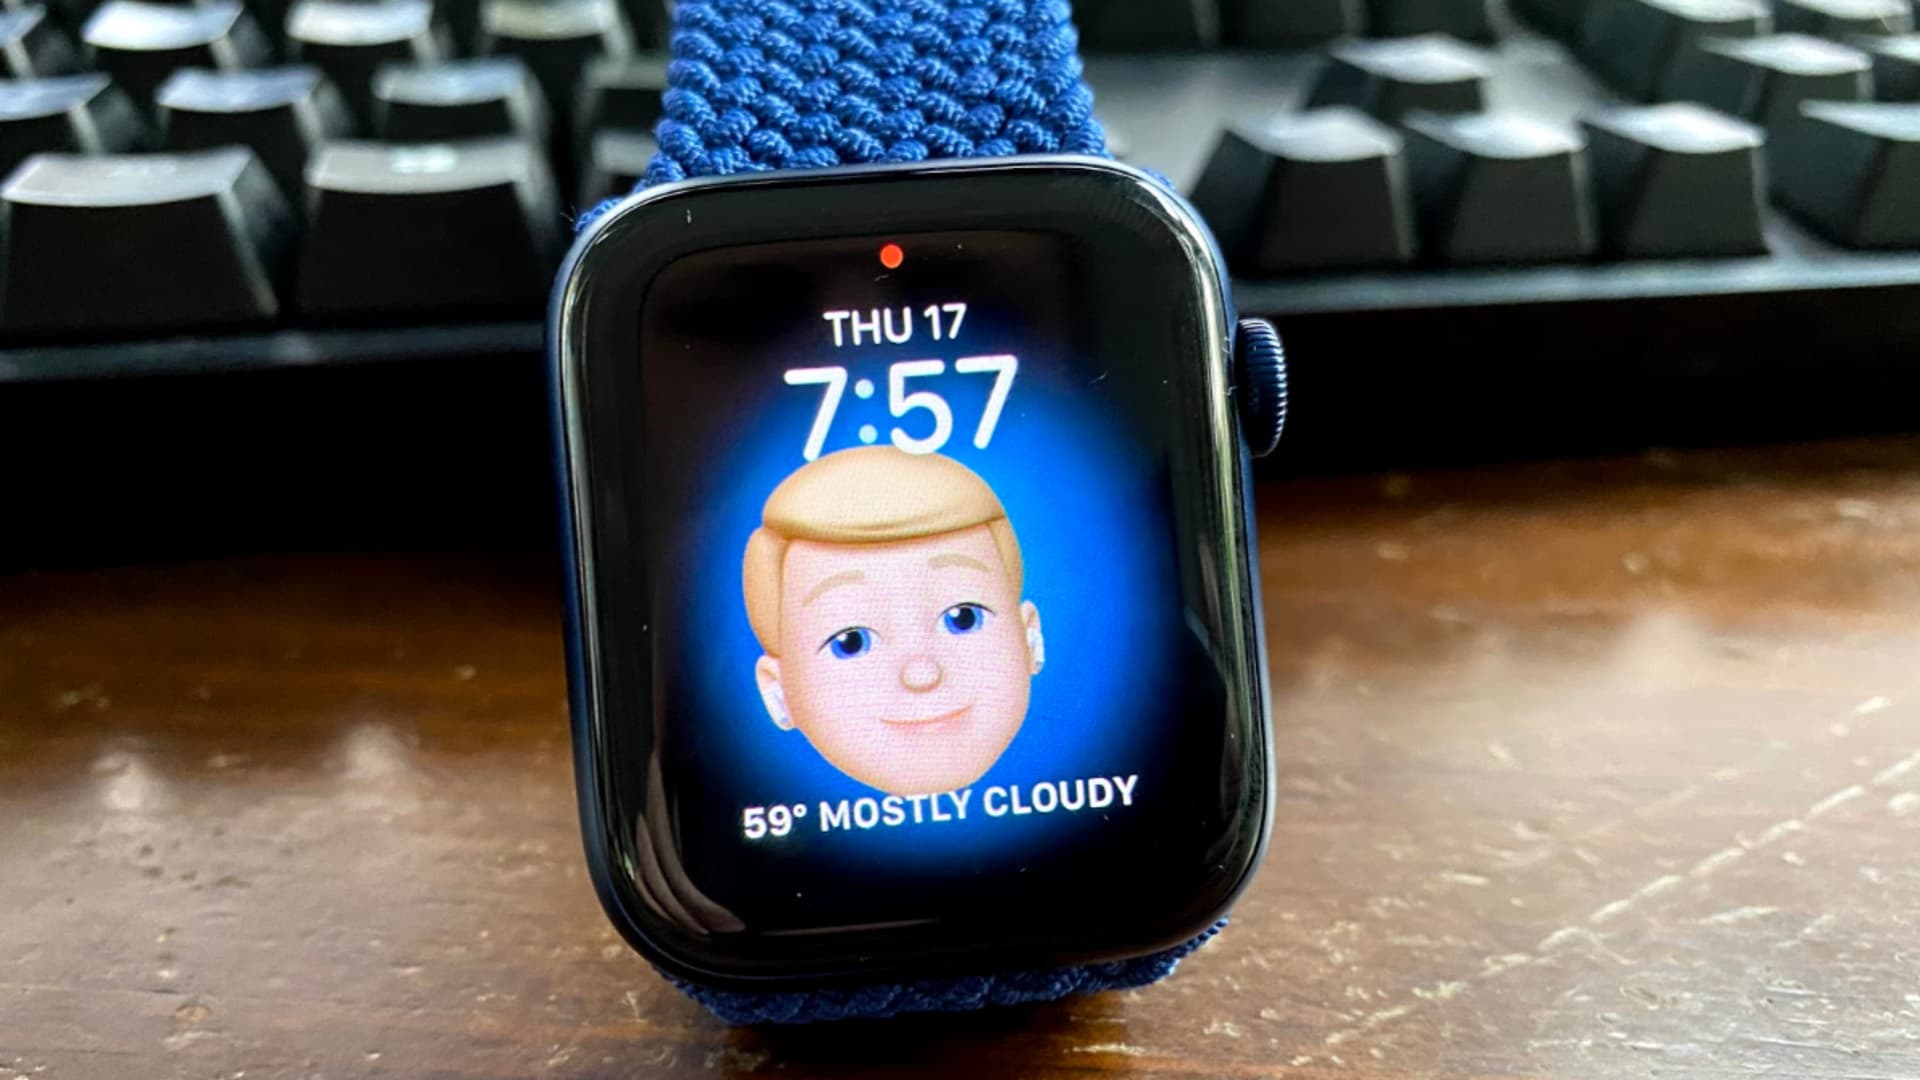 The new Apple Watch Series 6 is the best all-around smartwatch, but don't buy it just for the blood oxygen sensor